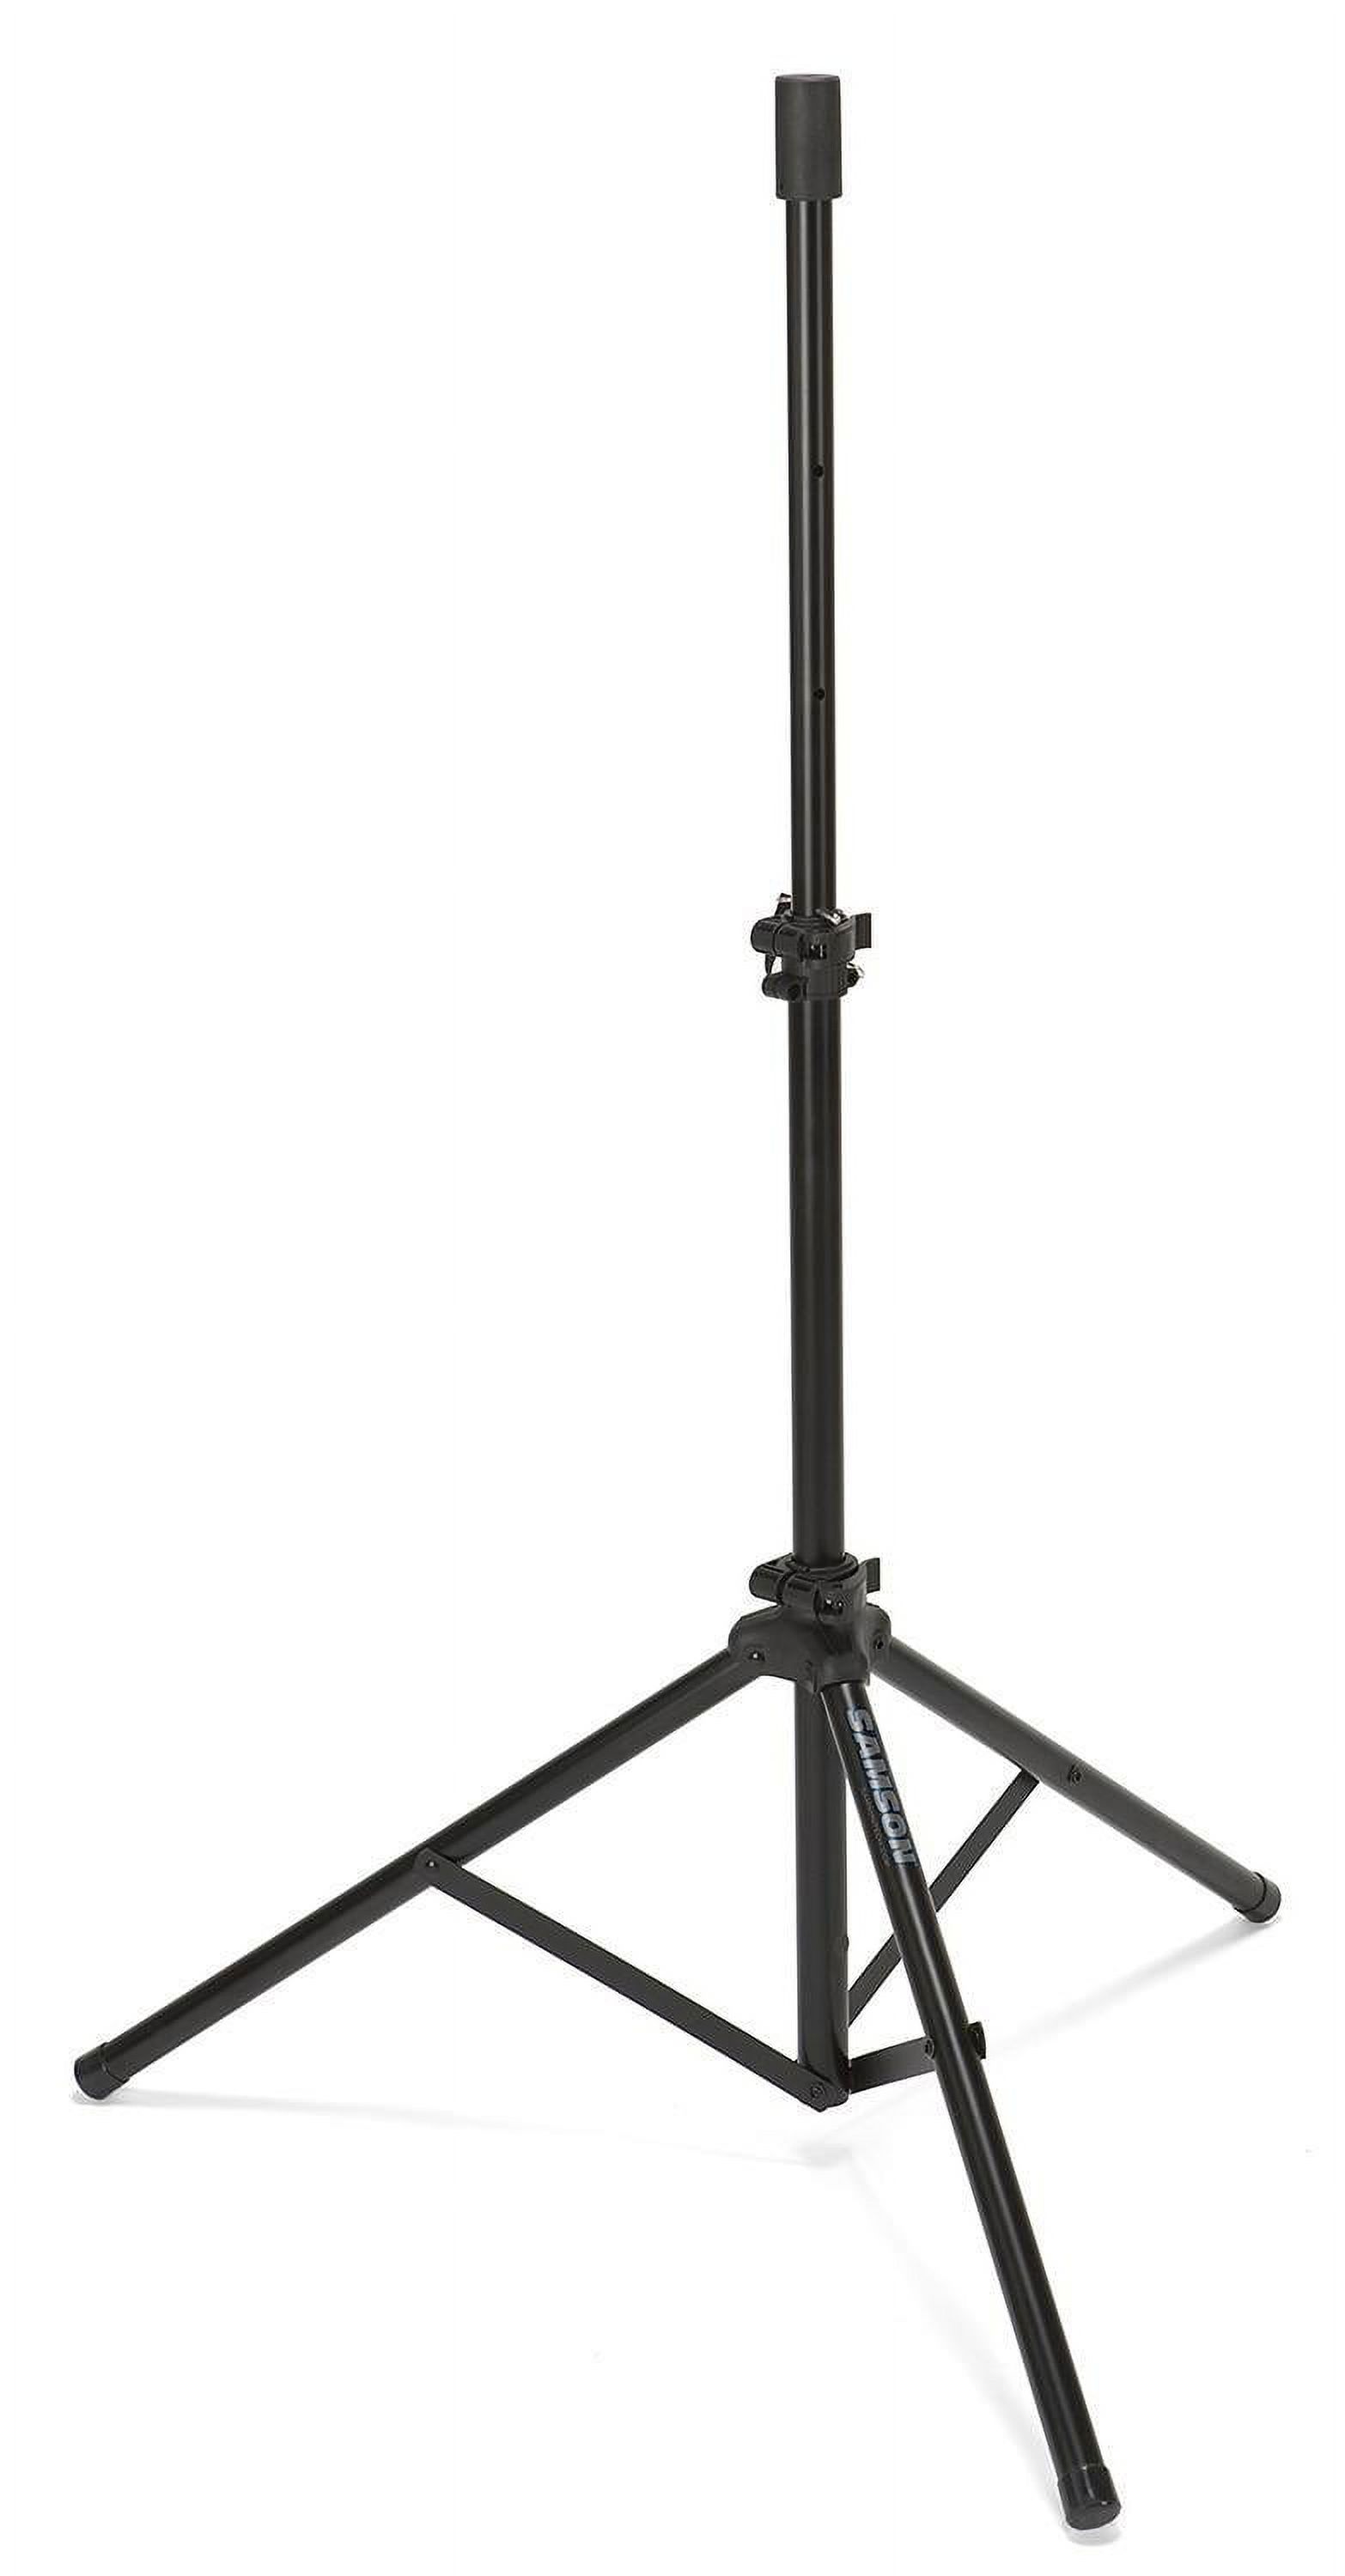 LS40 Lightweight Speaker Stand for Expedition Portable PAs, 55lbs Capacity - image 1 of 2